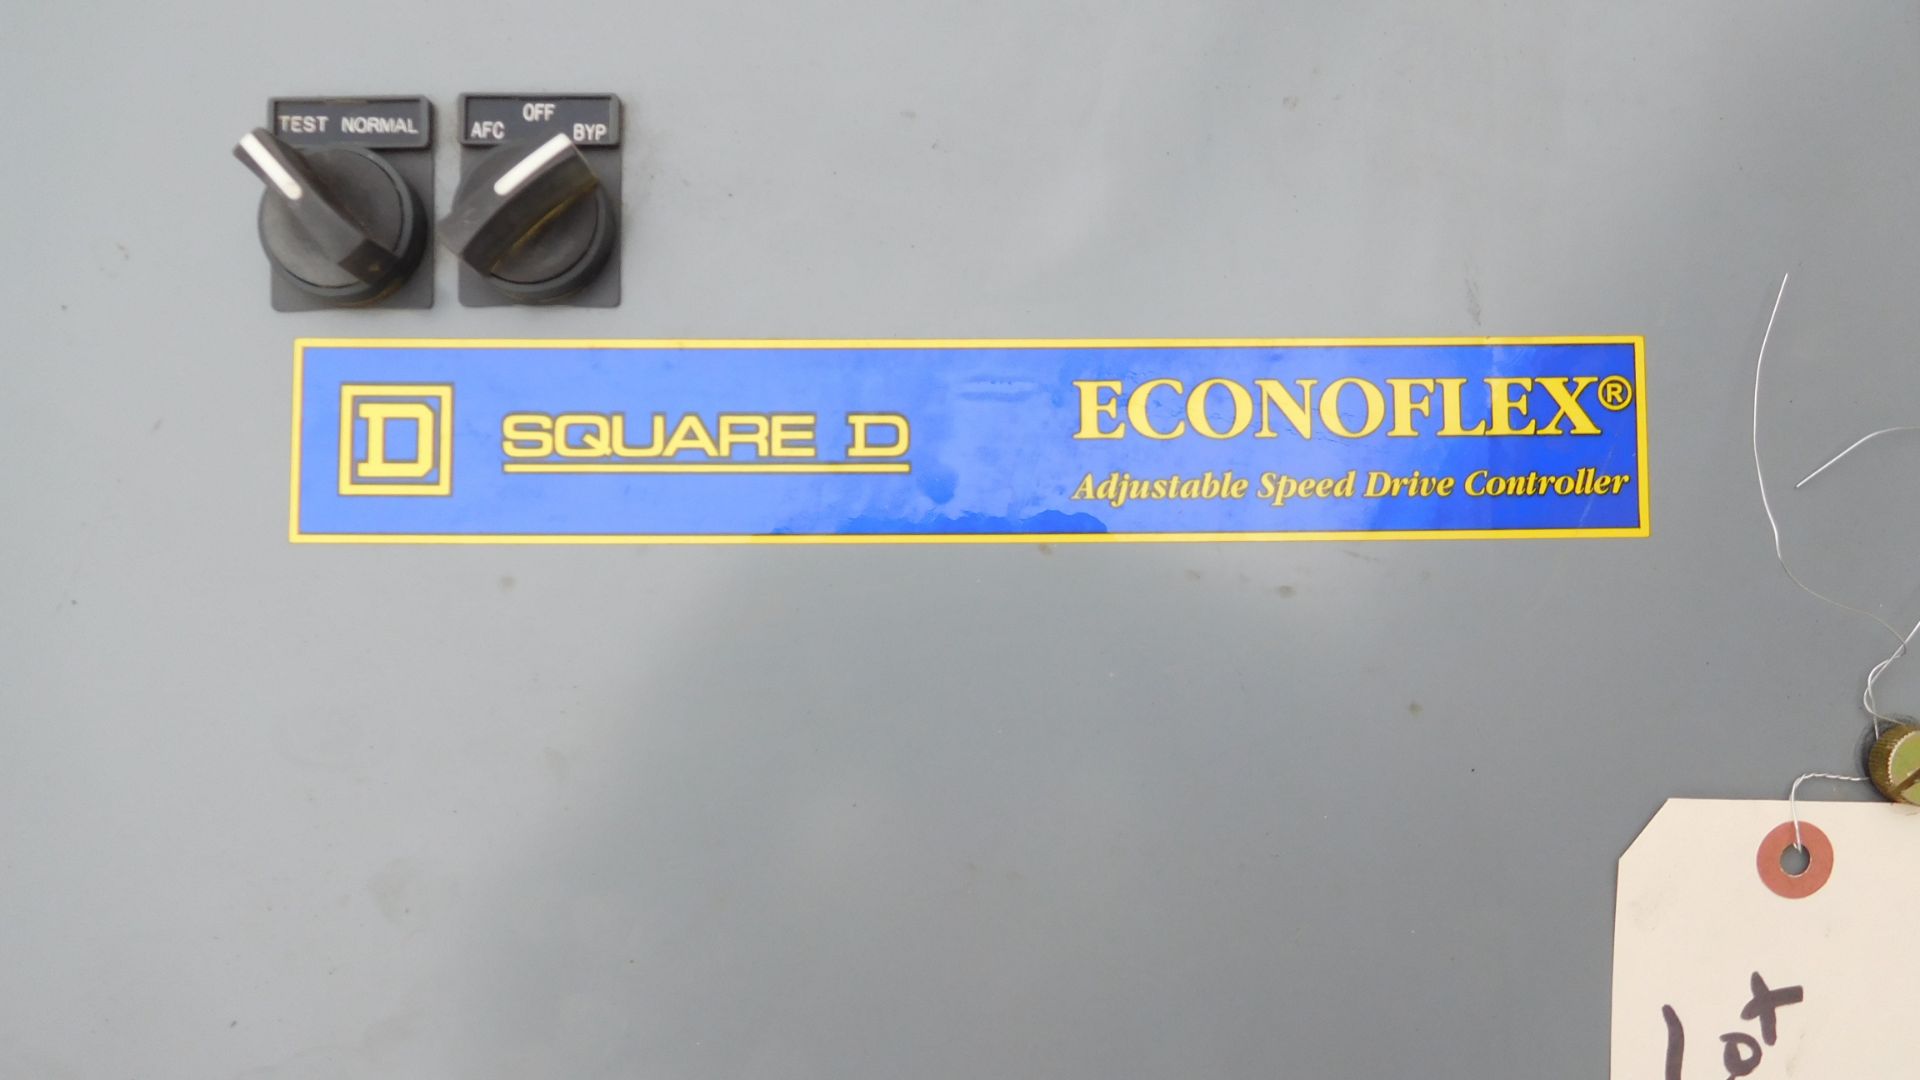 Square D Econoflex Adjustable Speed Drive Controller - Image 2 of 5